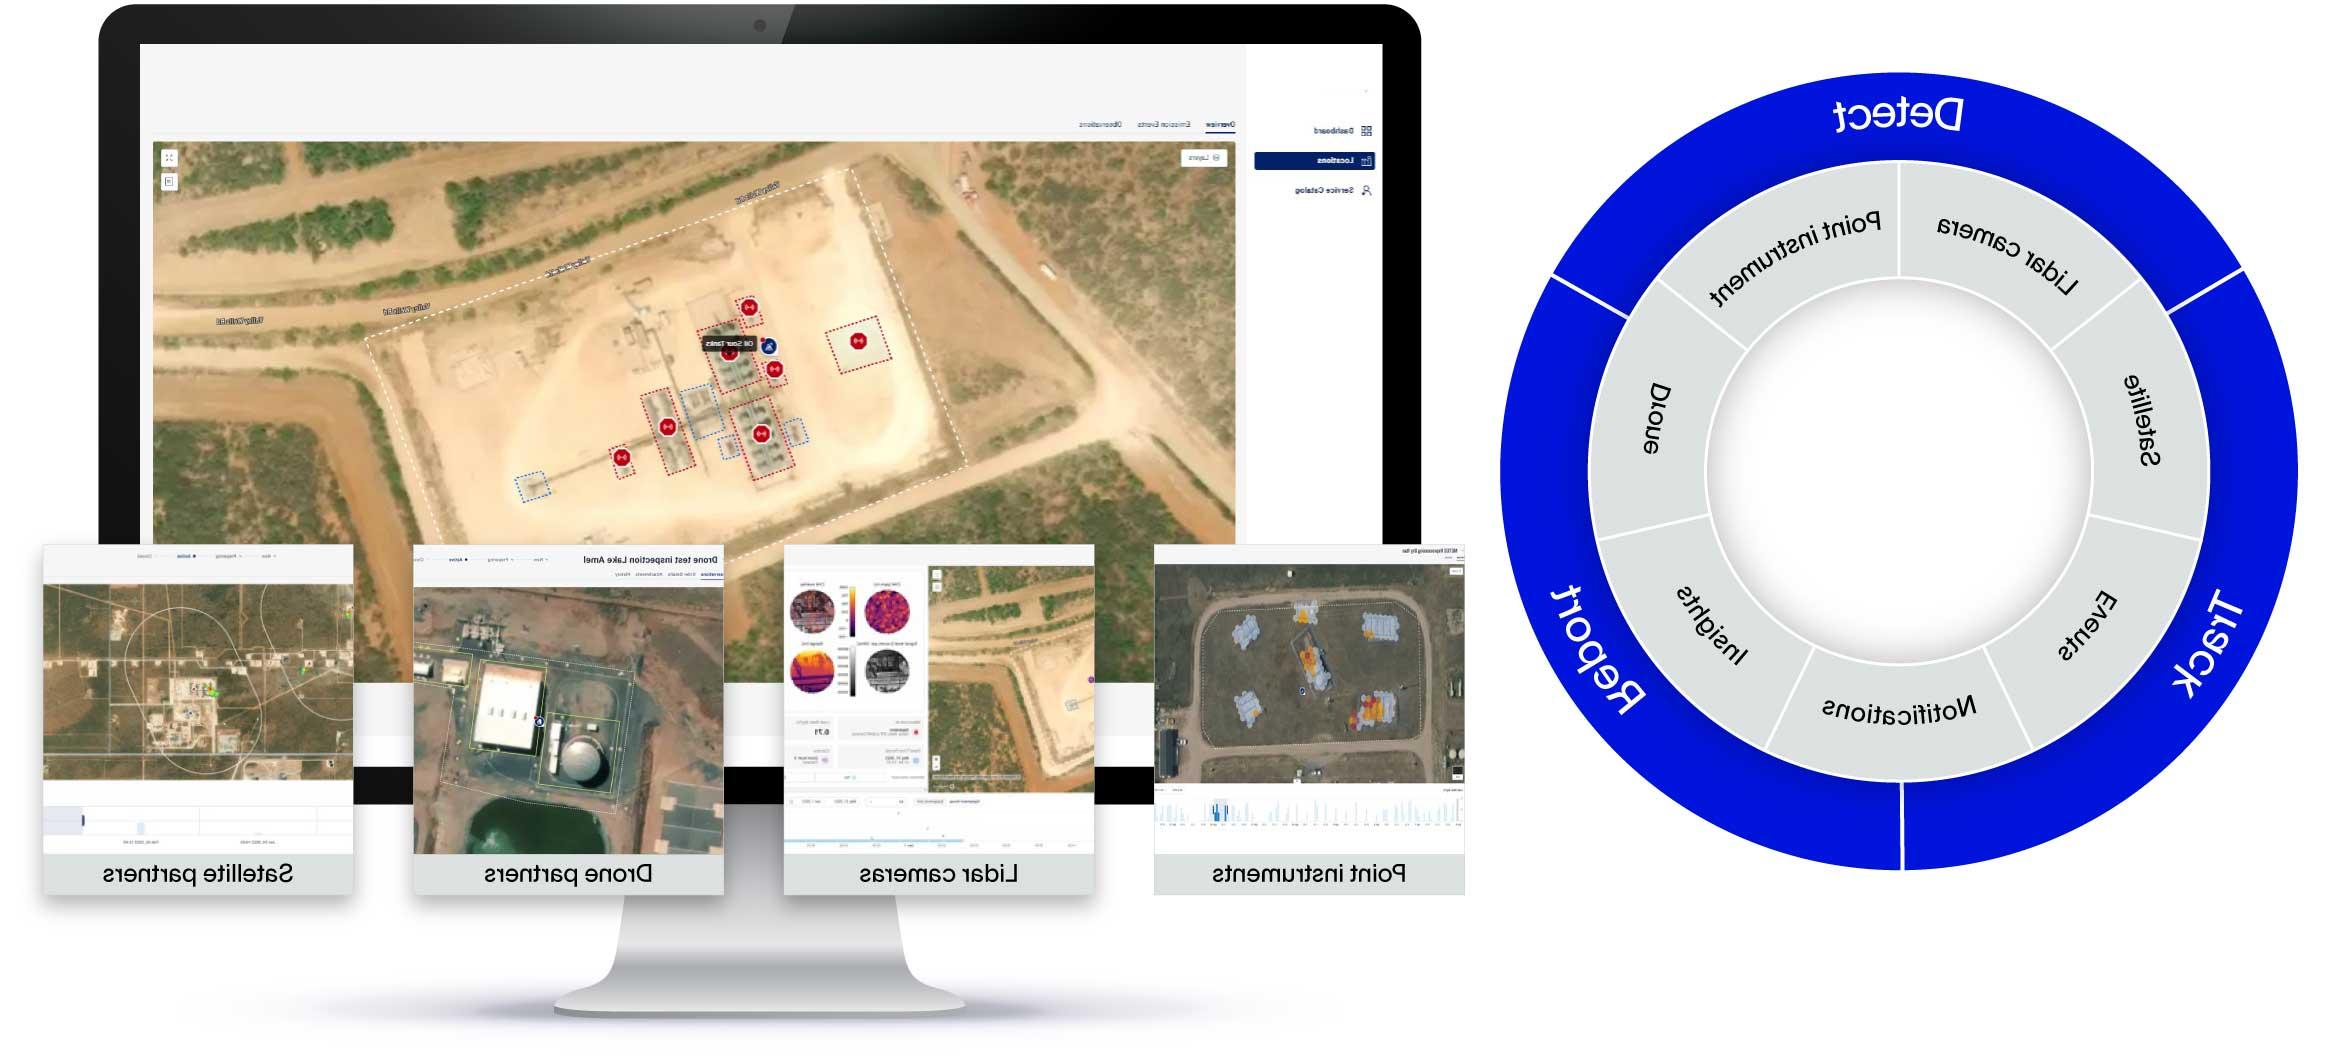 Our methane digital platform helps you manage your independent emissions measurements all in one place.